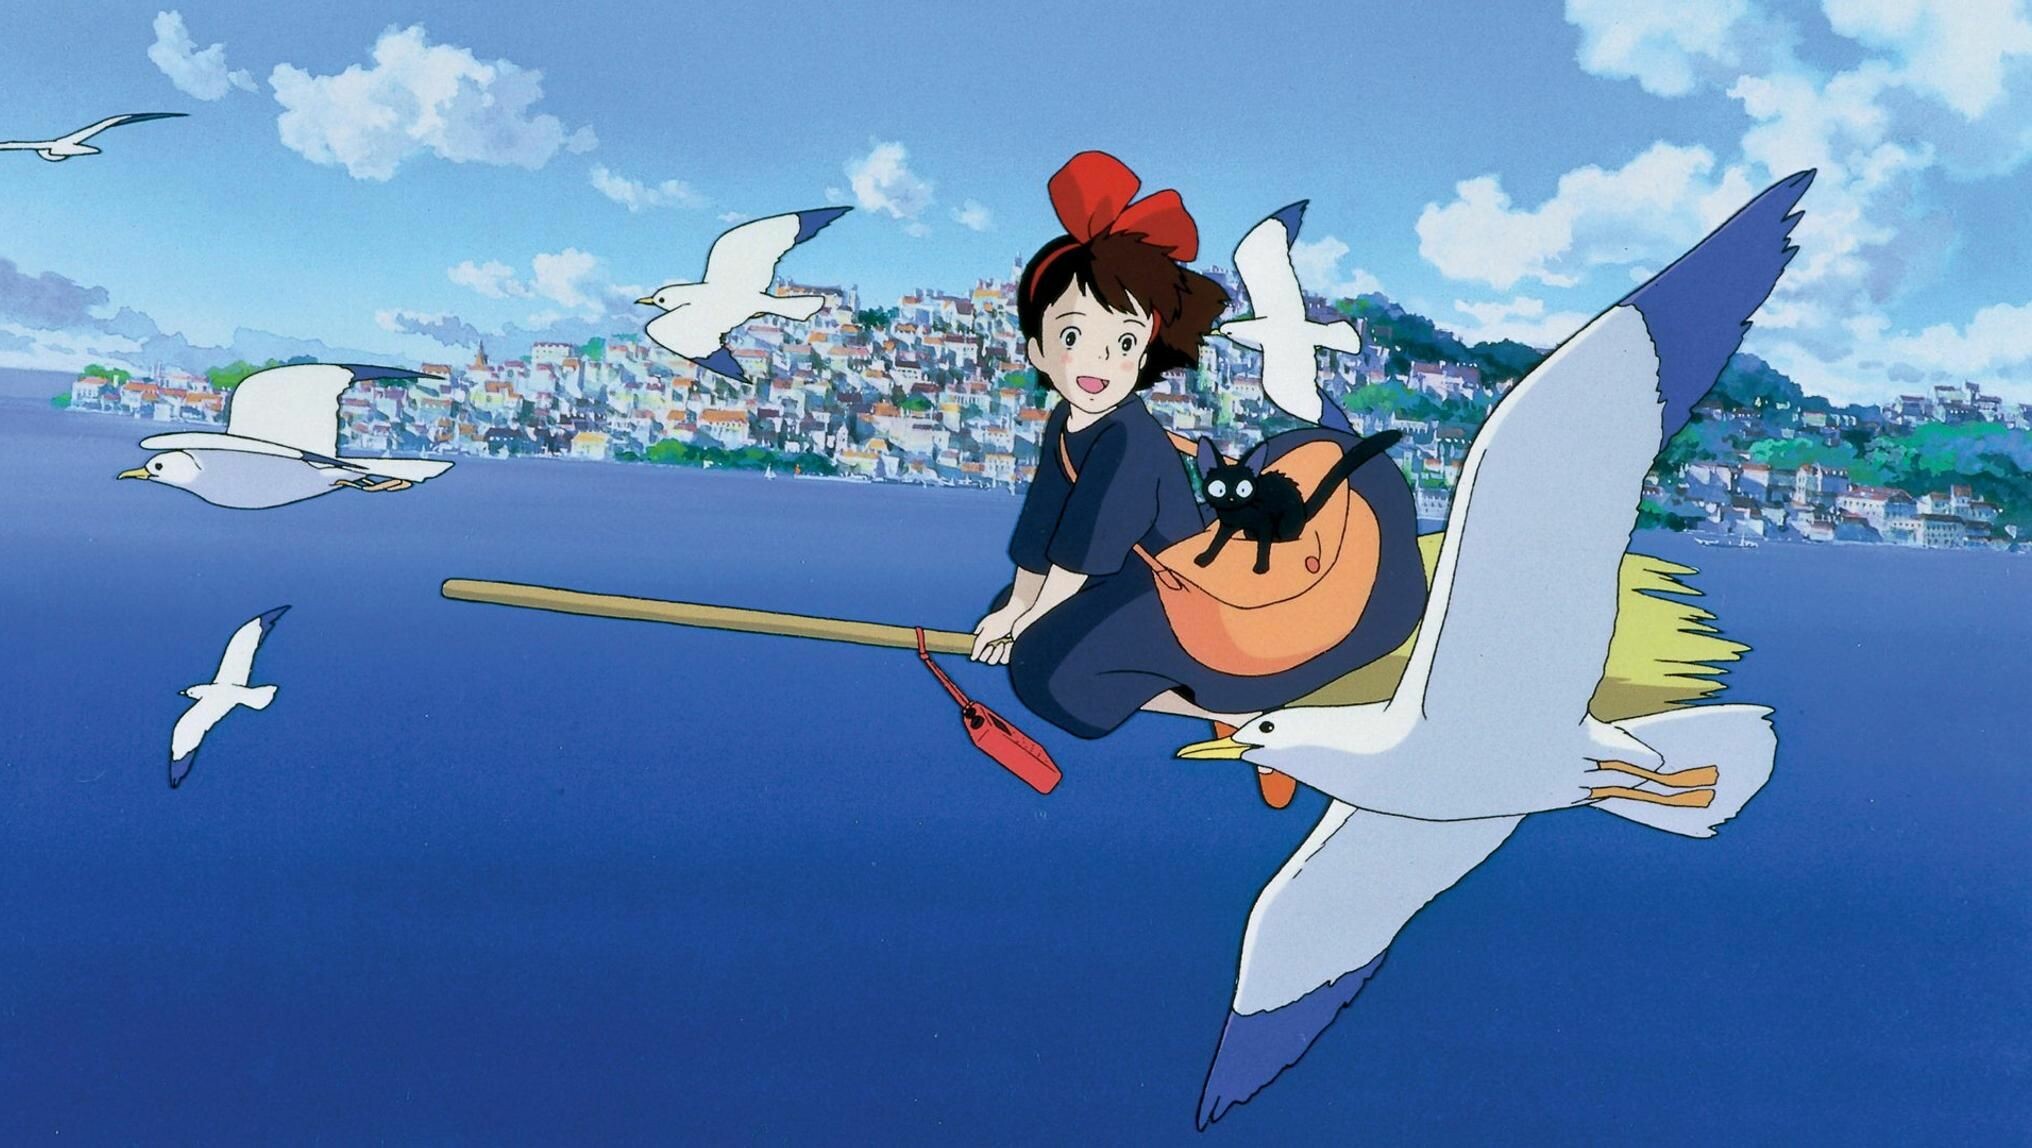 Kiki's Delivery Service: The original Japanese opening theme is "Rouge no Dengon" performed by Yumi Matsutoya. 2040x1150 HD Background.